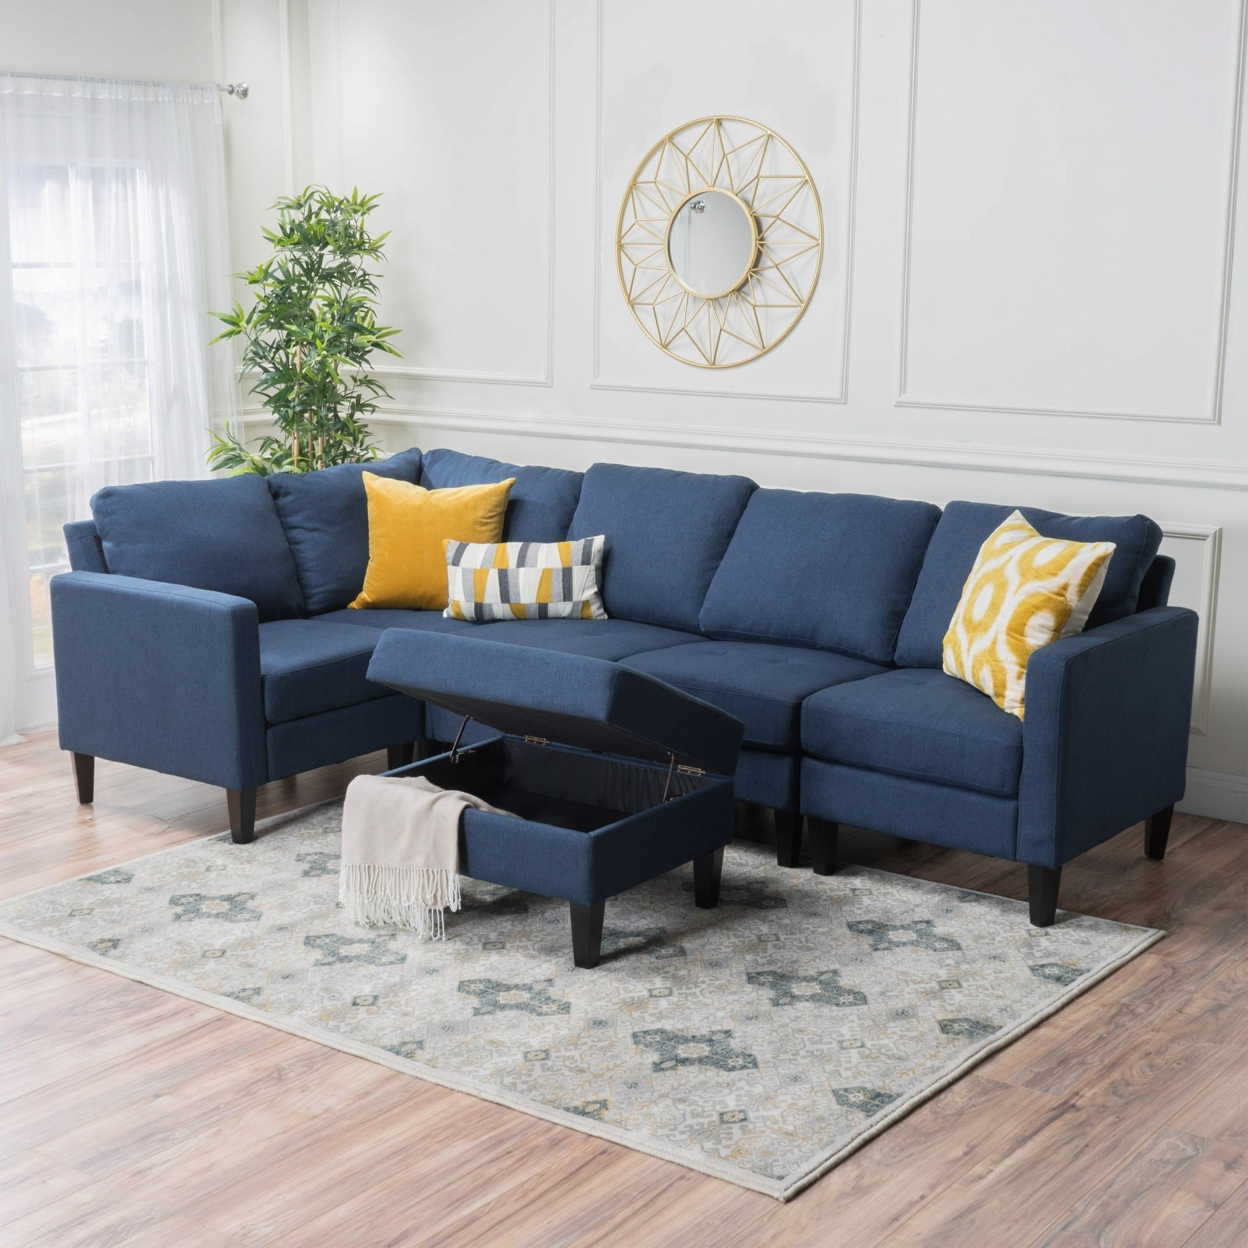 Carolina Fabric Sectional Couch With Storage Ottoman - Dark Blue